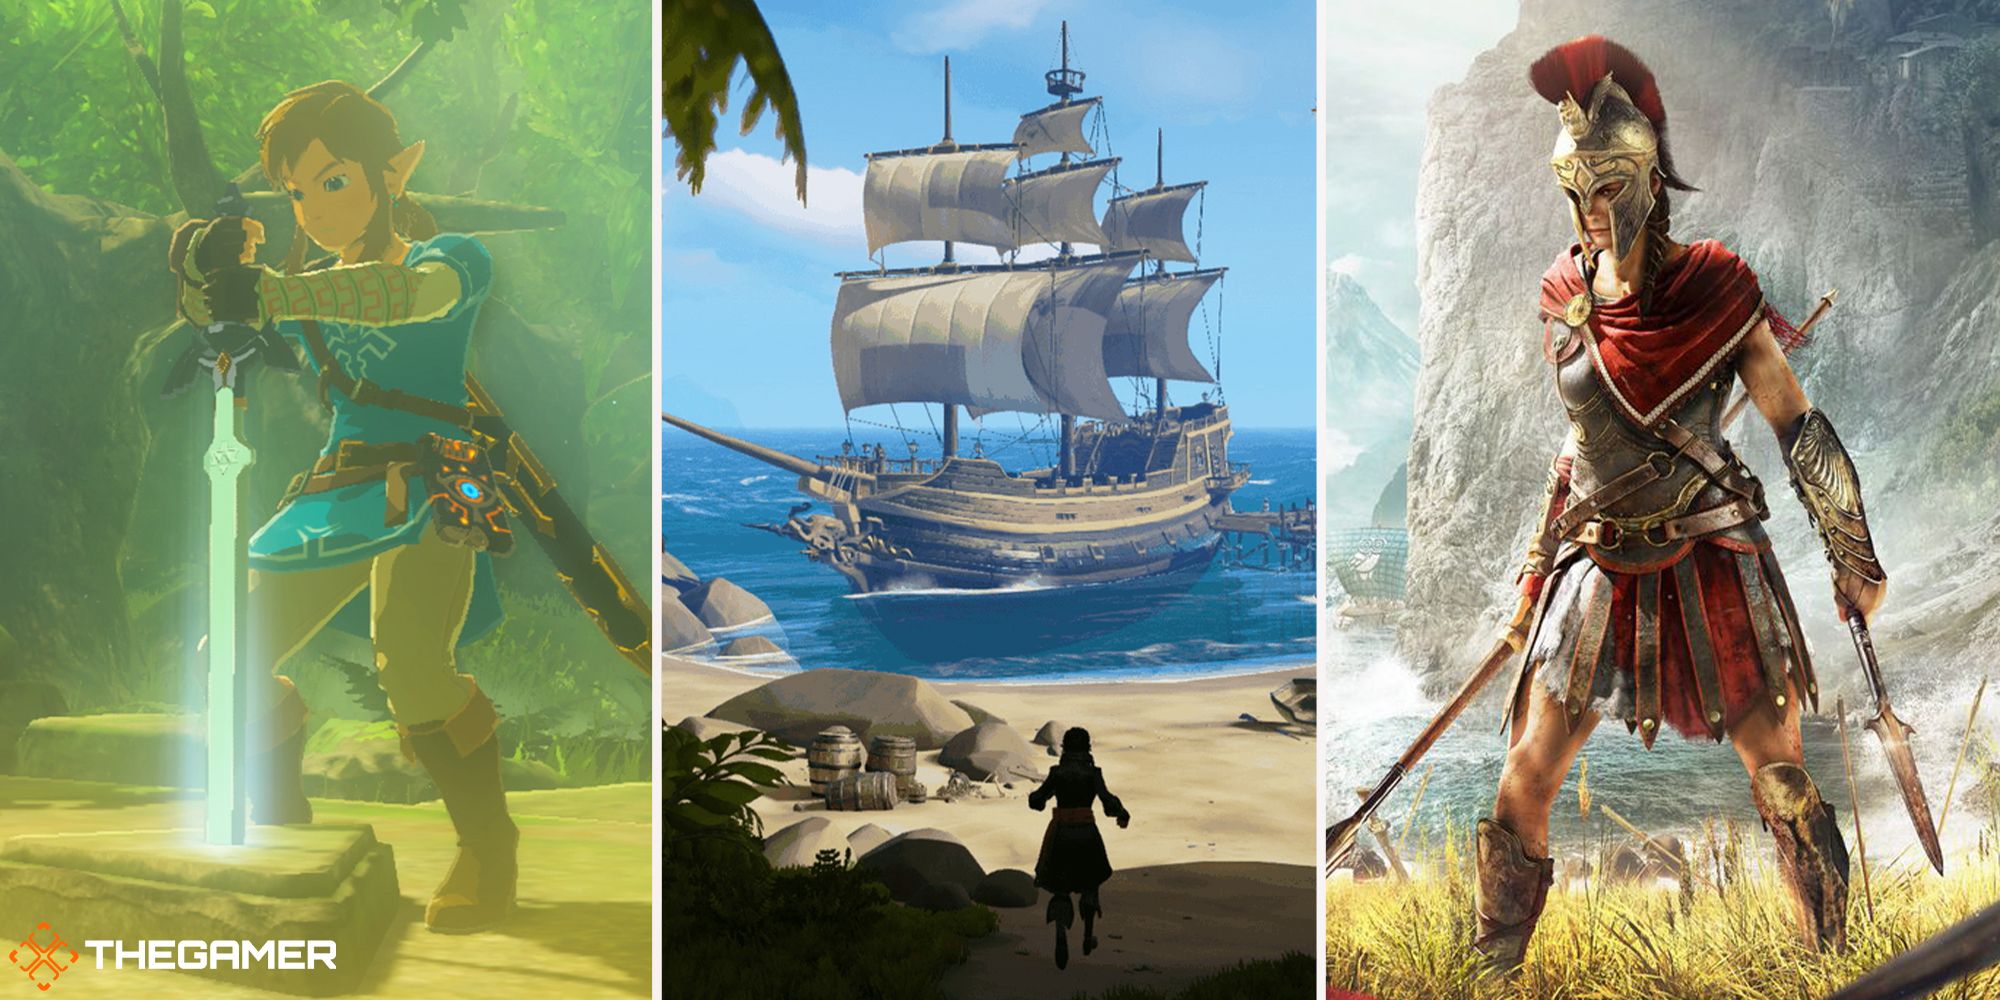 link (breath of the wild) on left, pirate ship (sea of thieves) in centre, kassandra (assassin's creed odyssey) on right